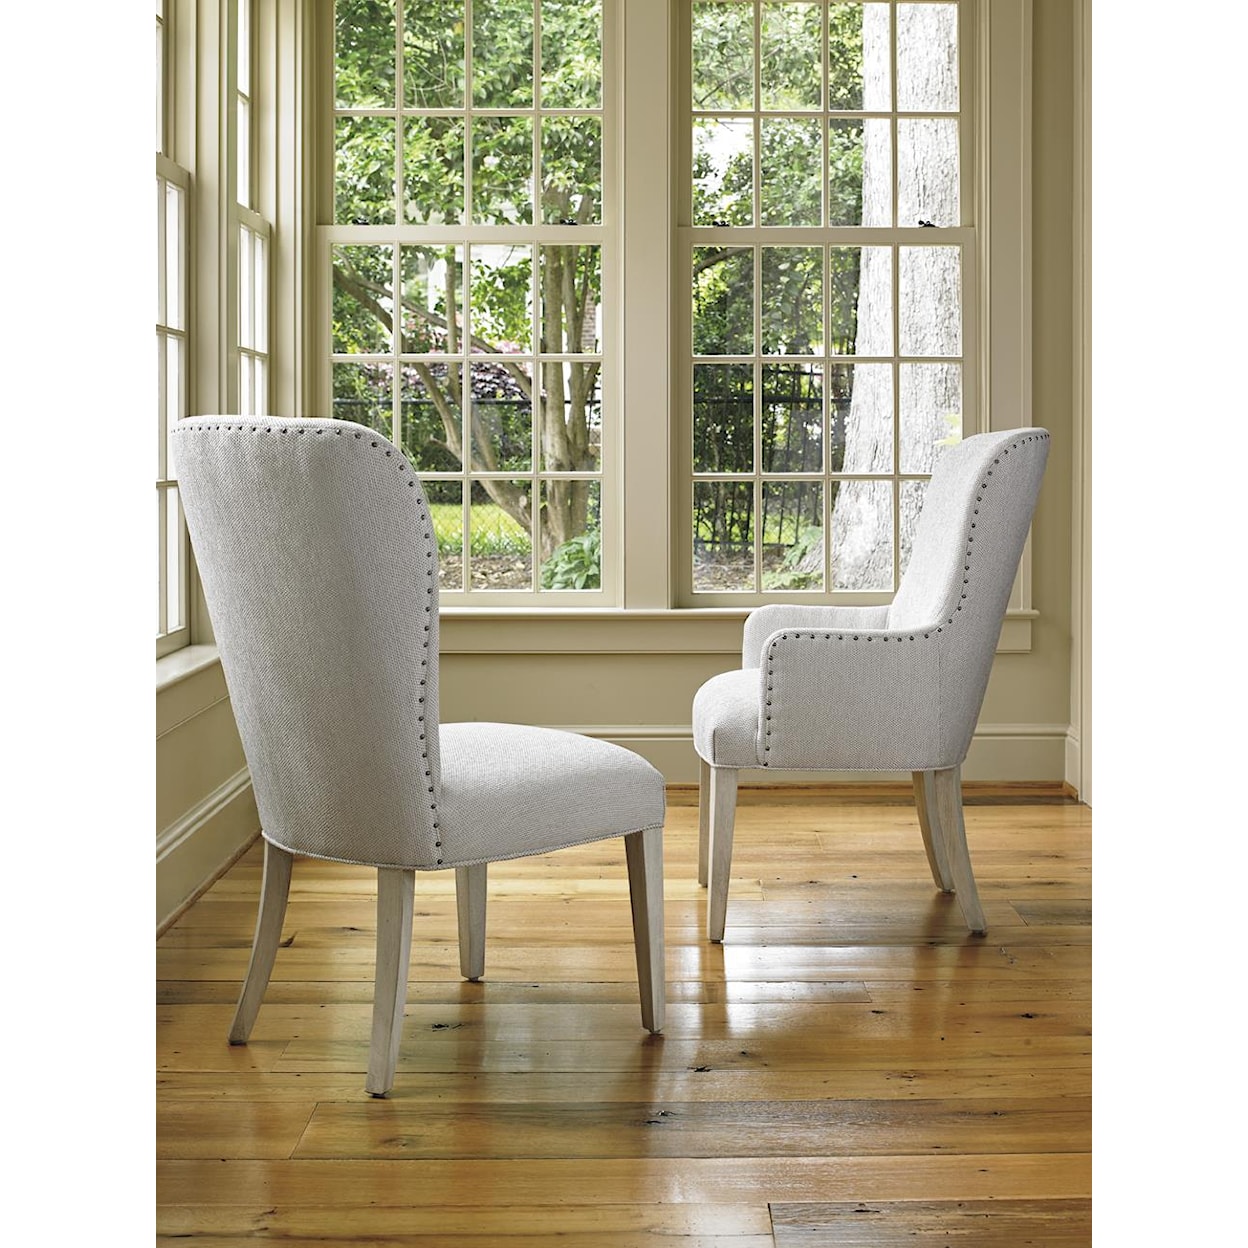 Lexington Oyster Bay BAXTER UPHOLSTERED SIDE CHAIR